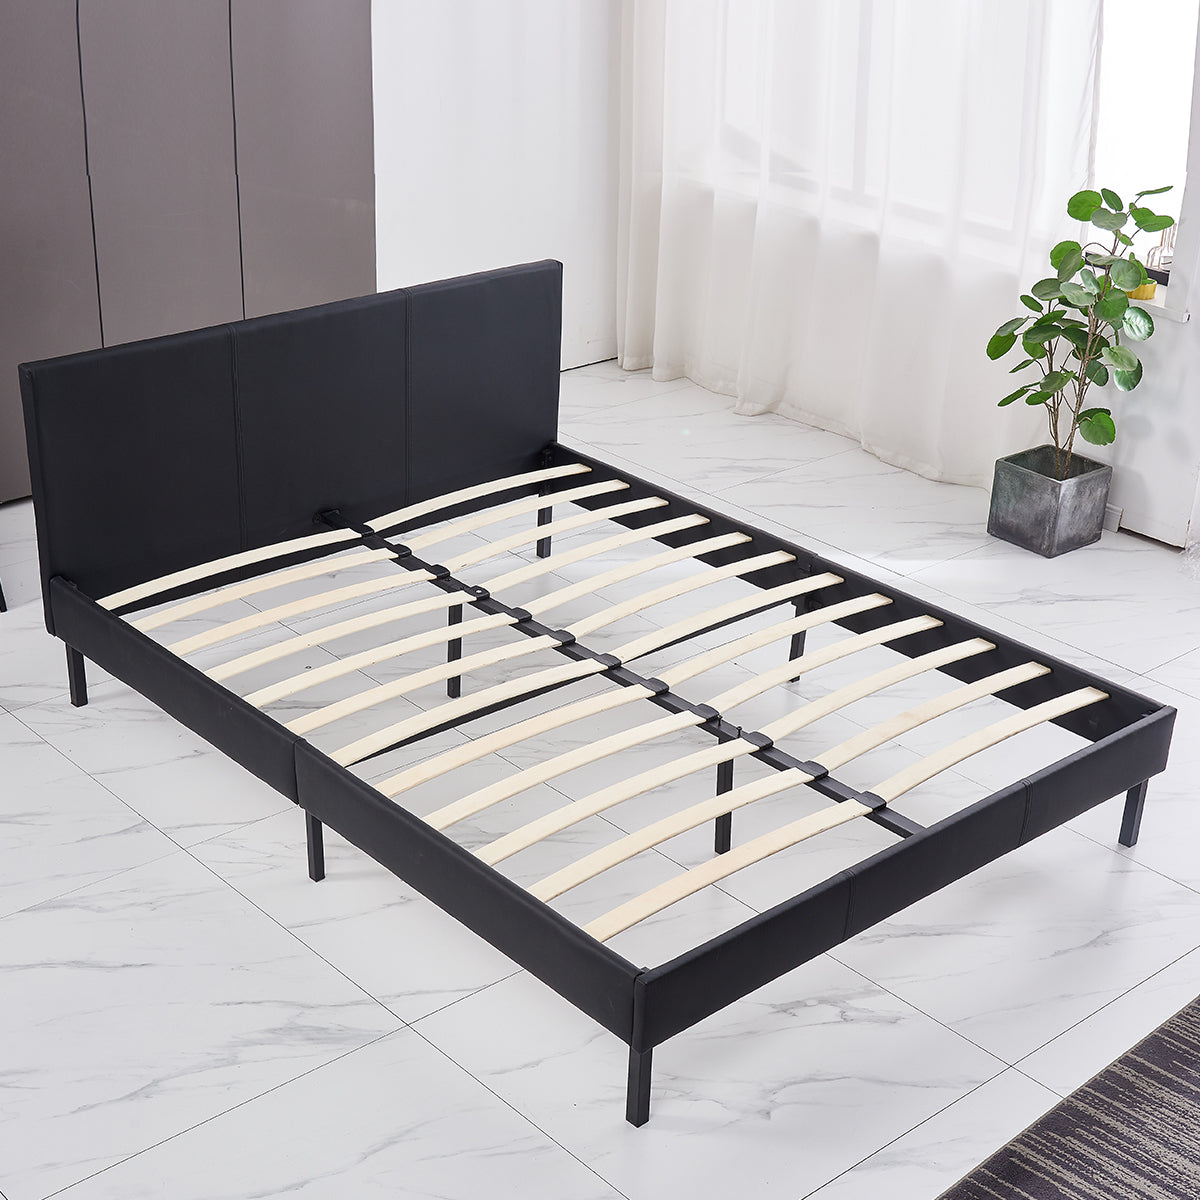 Snailhome® Queen Size Upholstered PU Leather Platform Bed Frame